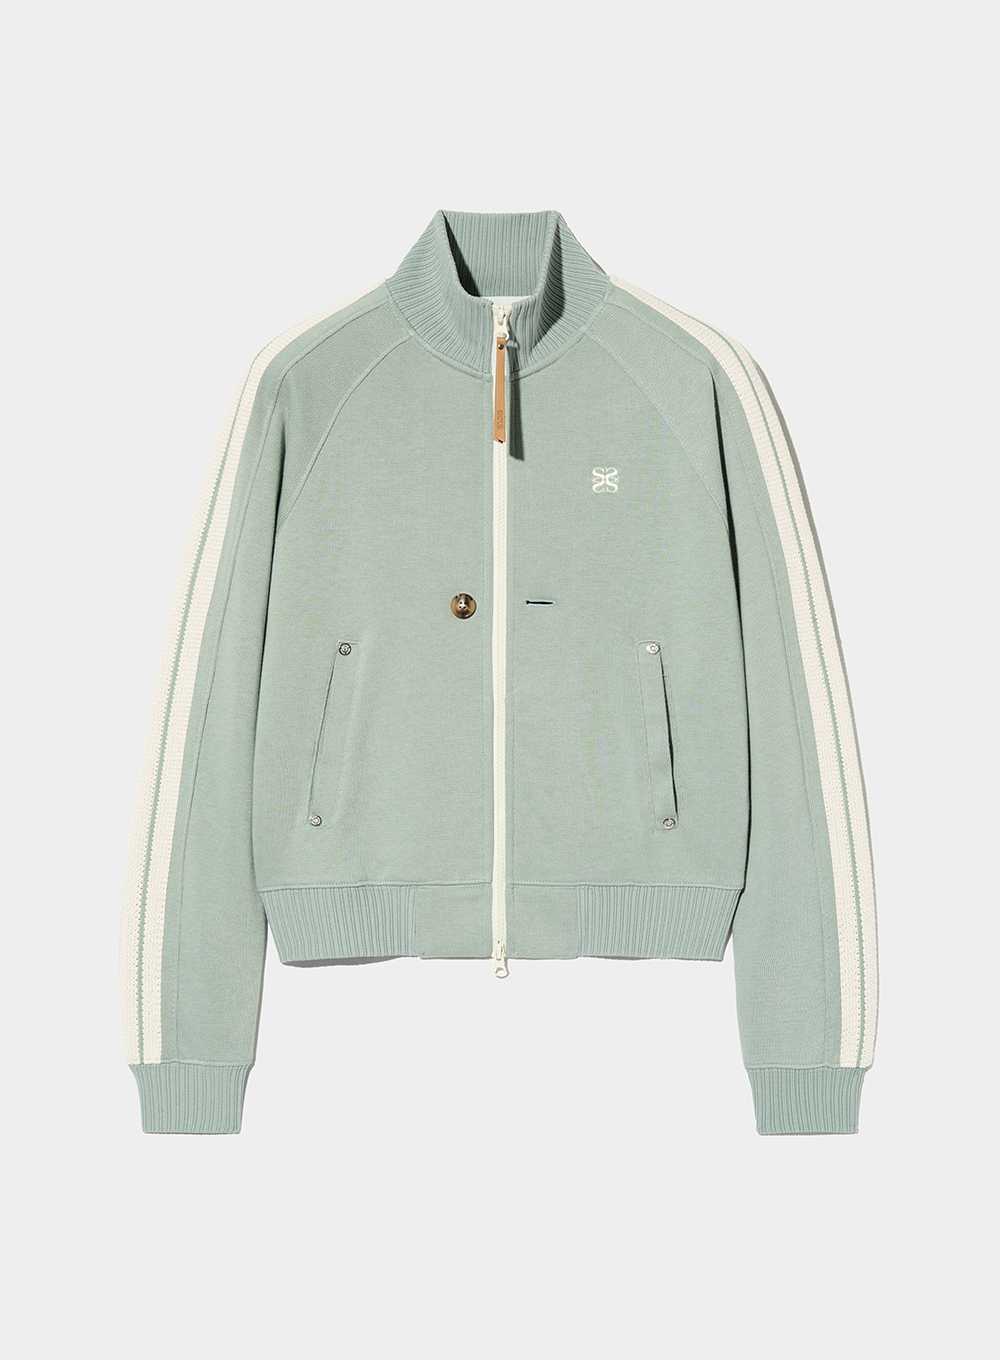 (W) Lawton All Day Track Zip-Up Jacket - Olive Mint